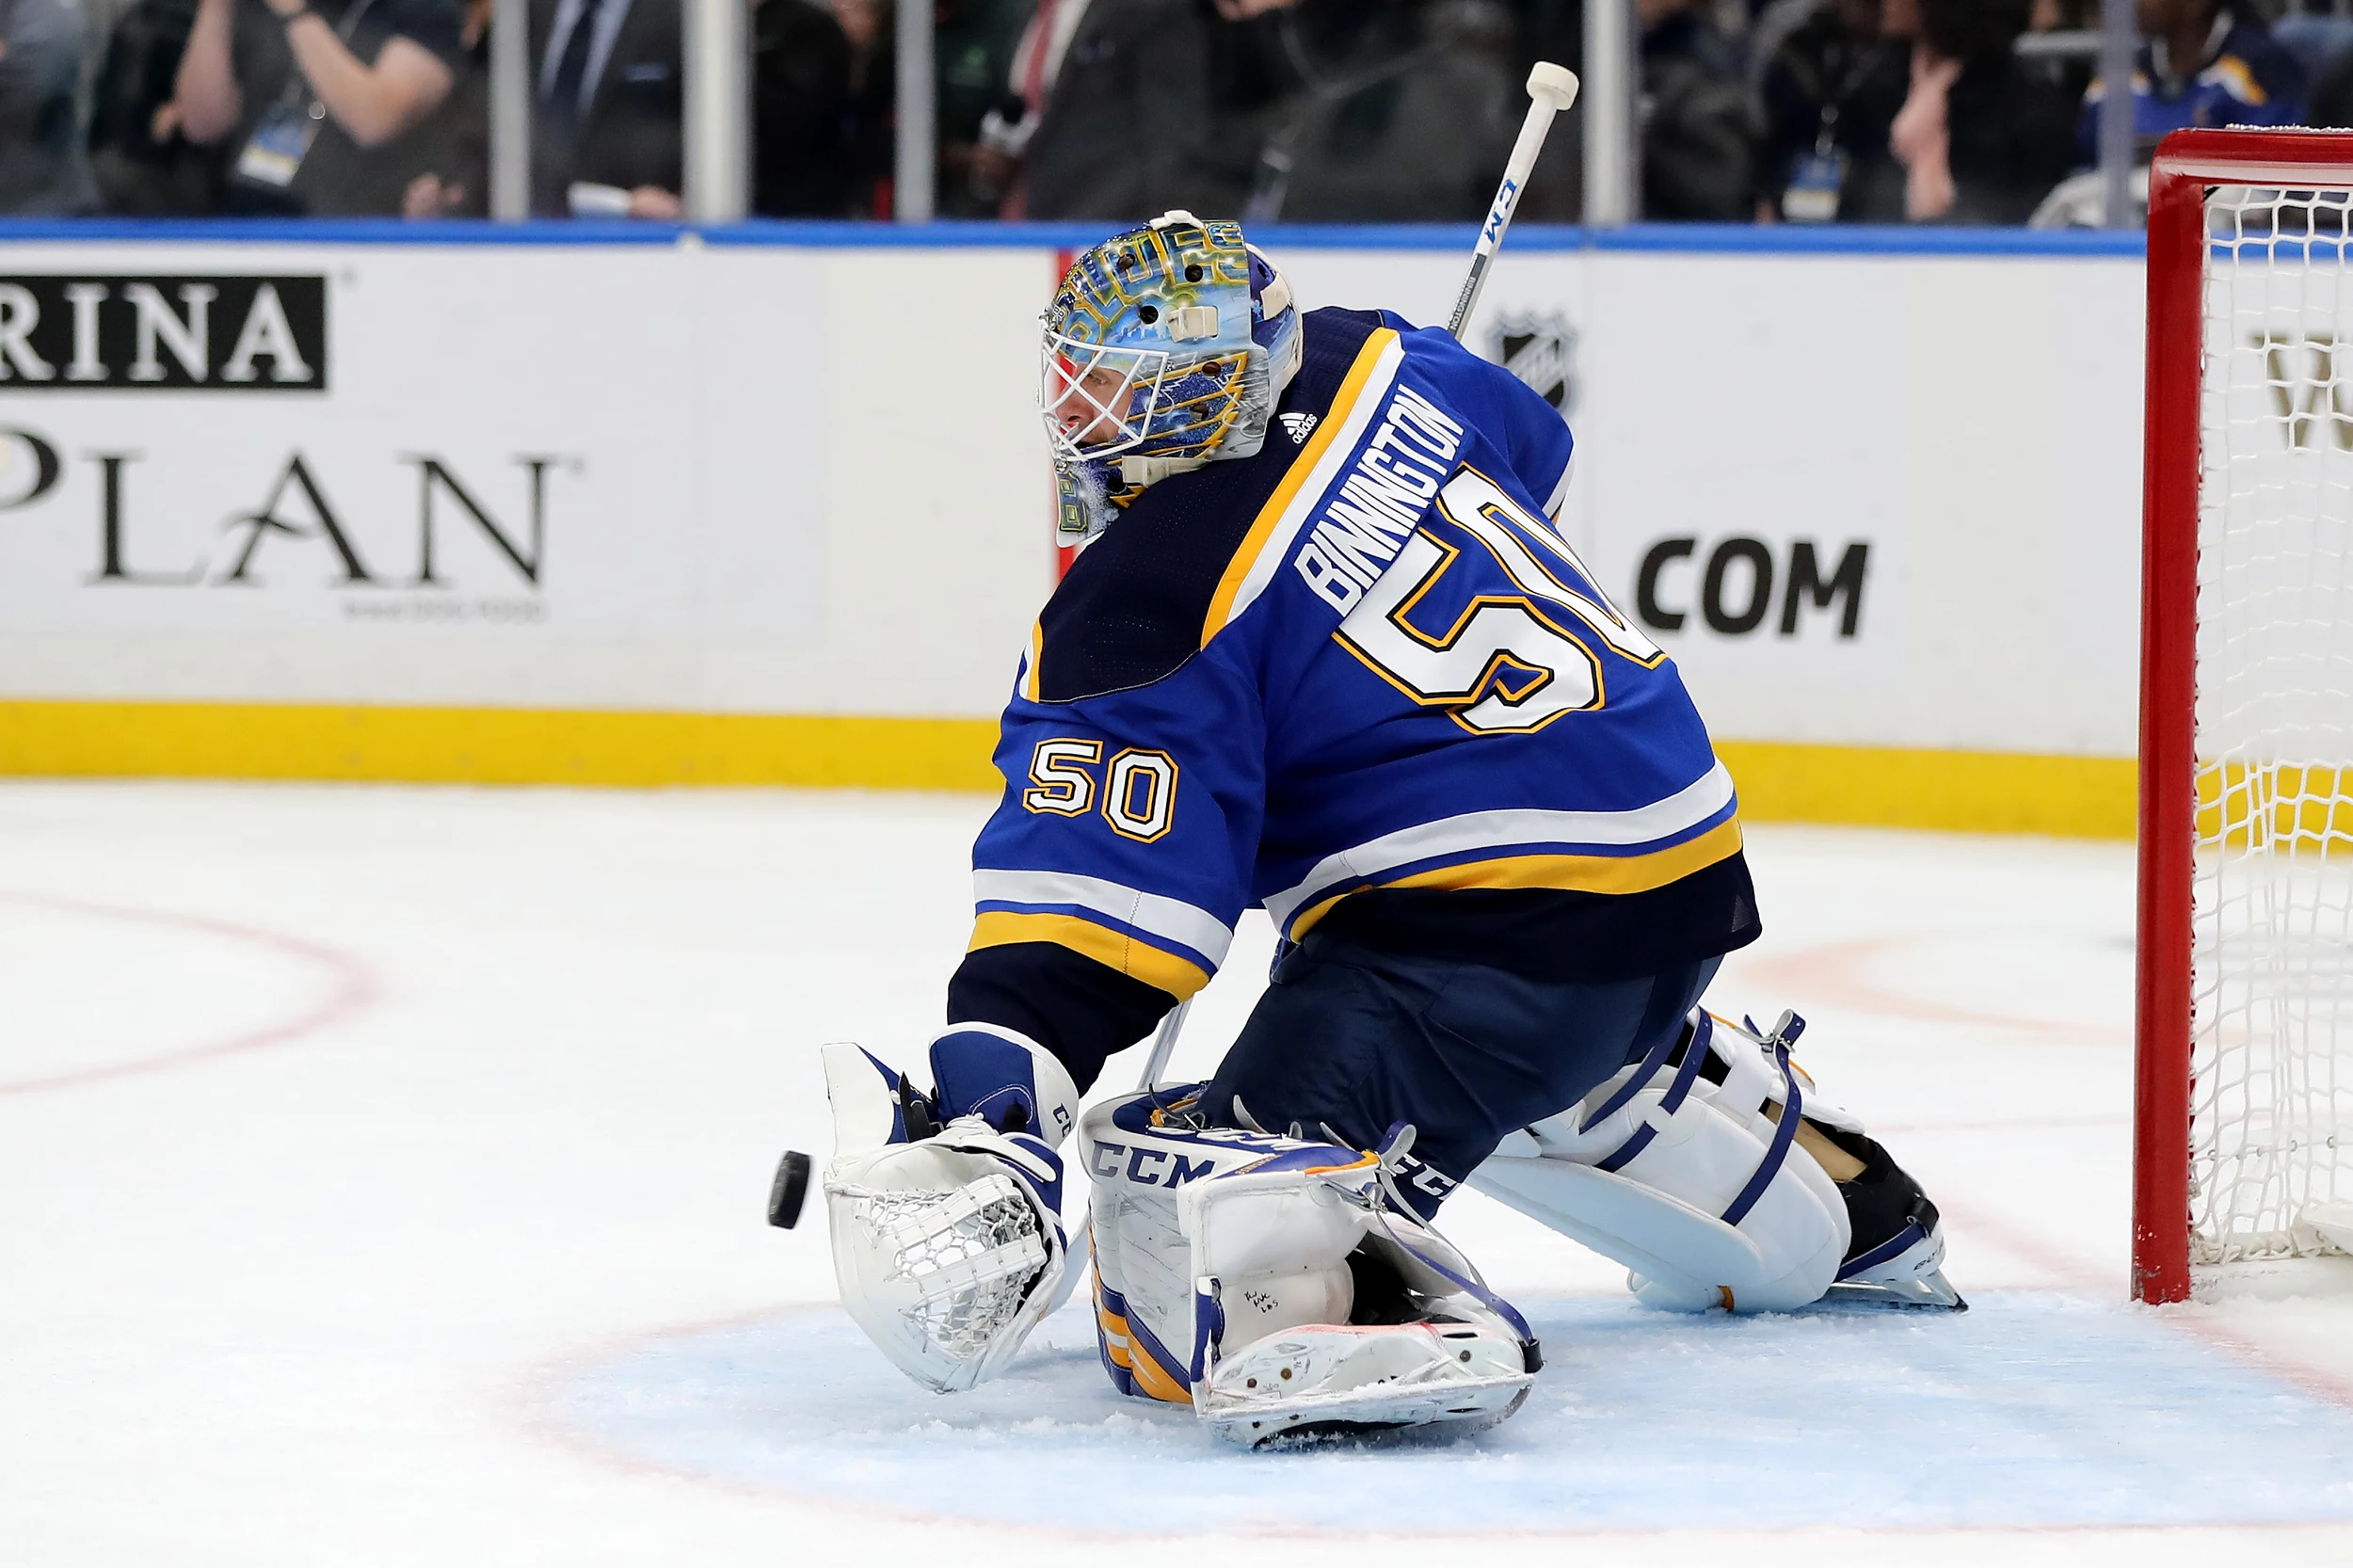 Kalamazoo Gets Shout Out From Doc; Ex-K-Wing Binnington Wins Cup